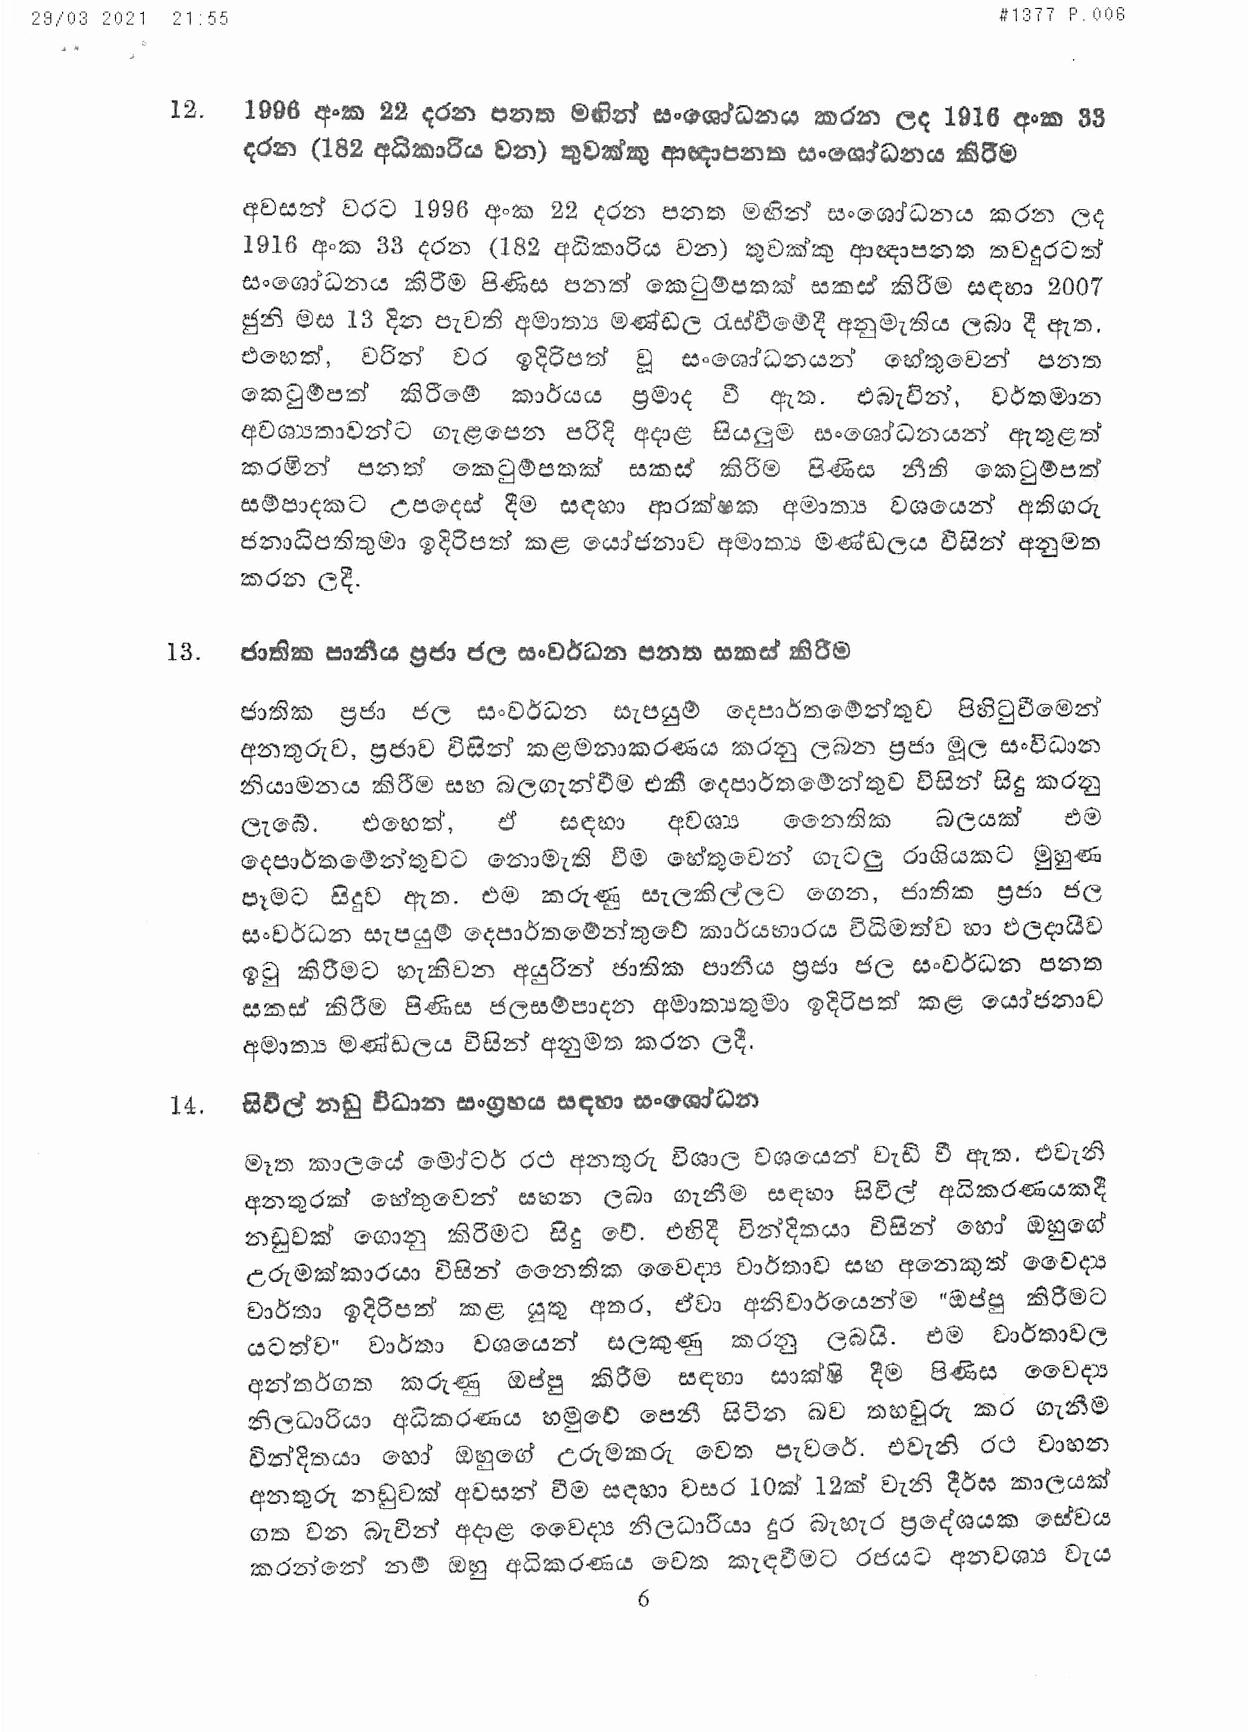 Cabinet Decision on 29.03.2021 Sinhala page 006